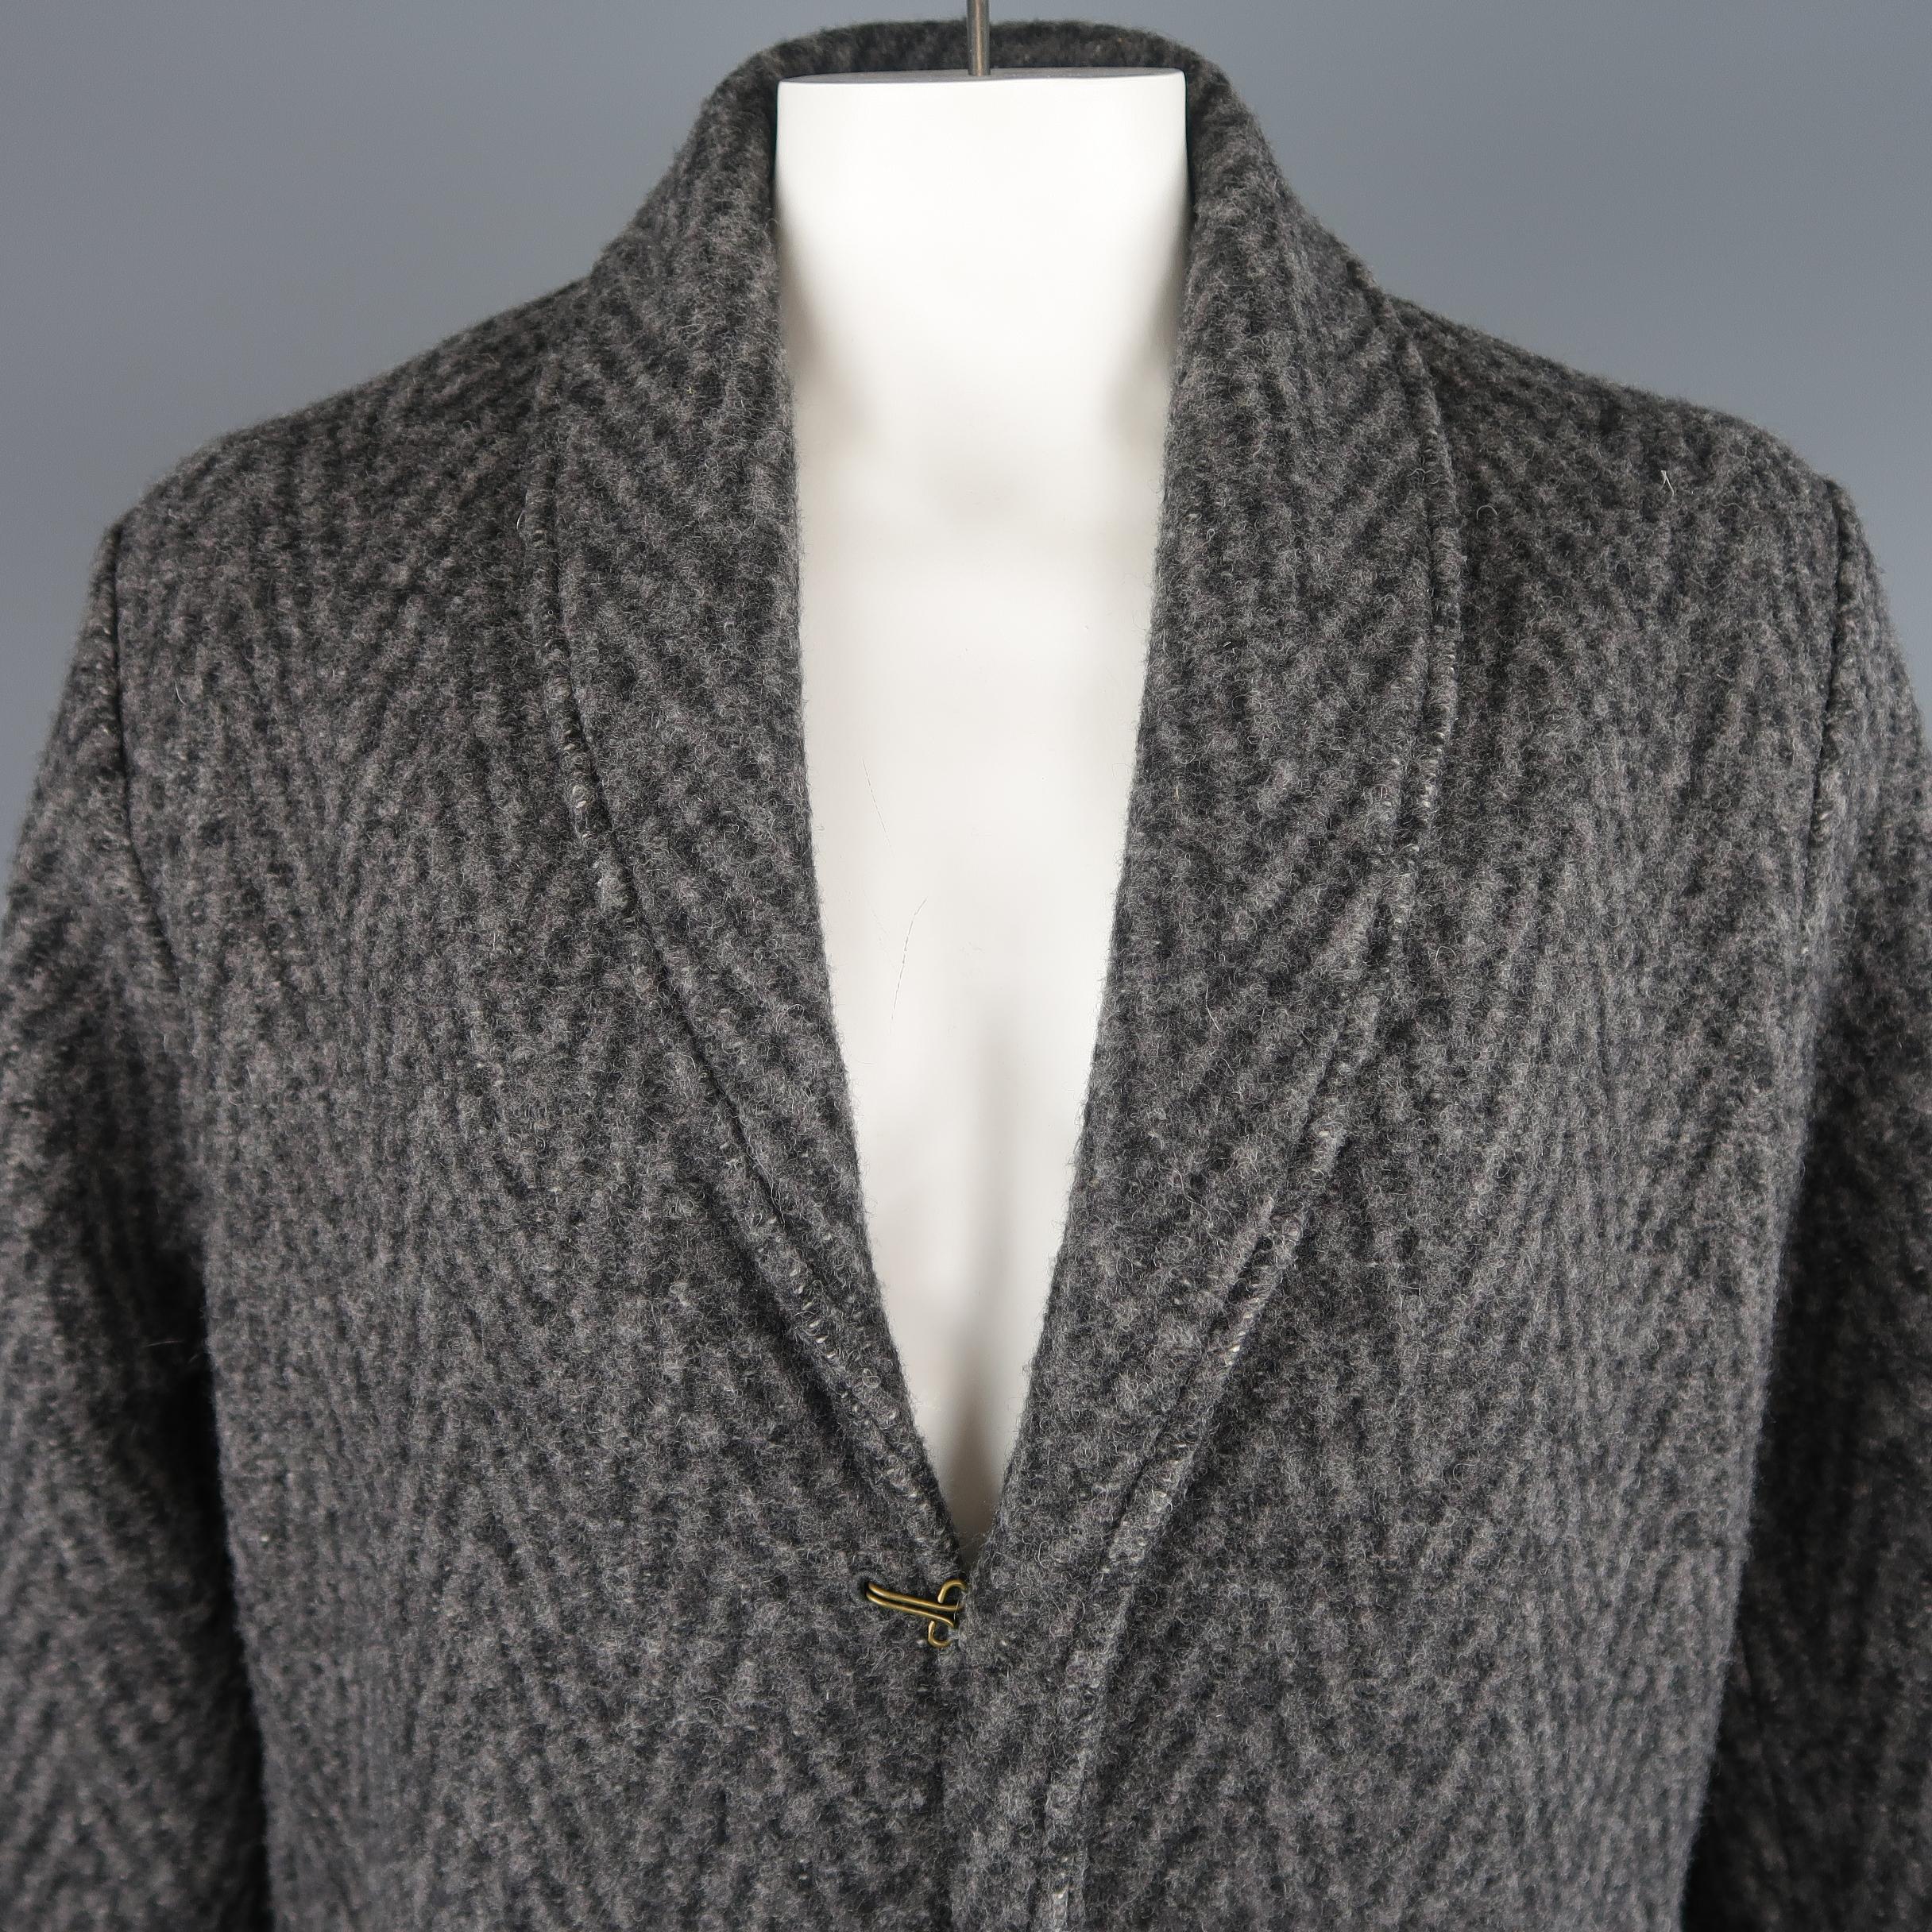 Levi's Made & Crafted coat comes in gray chevron print wool knit with a shawl collar, slit pockets, and hook eye closures. Missing hook. As-is. Made in Romania.
 
Good Pre-Owned Condition.
Marked: M
 
Measurements:
 
Shoulder: 20 in.
Chest: 52